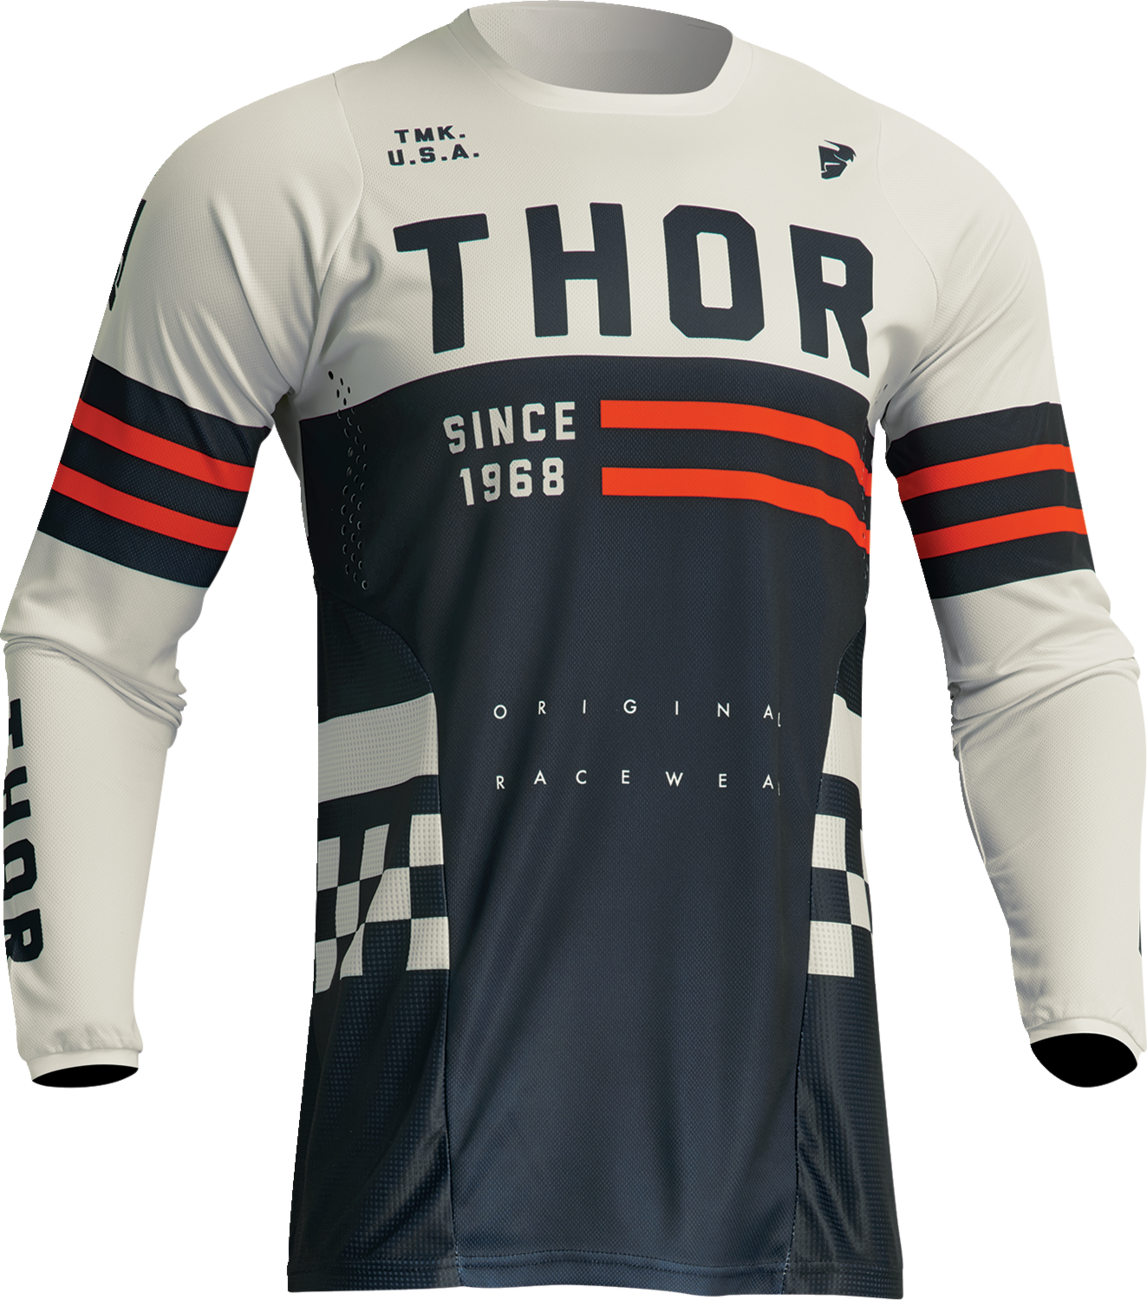 THOR Youth Pulse Combat Jersey - Midnight/White - 2XS 2912-2185